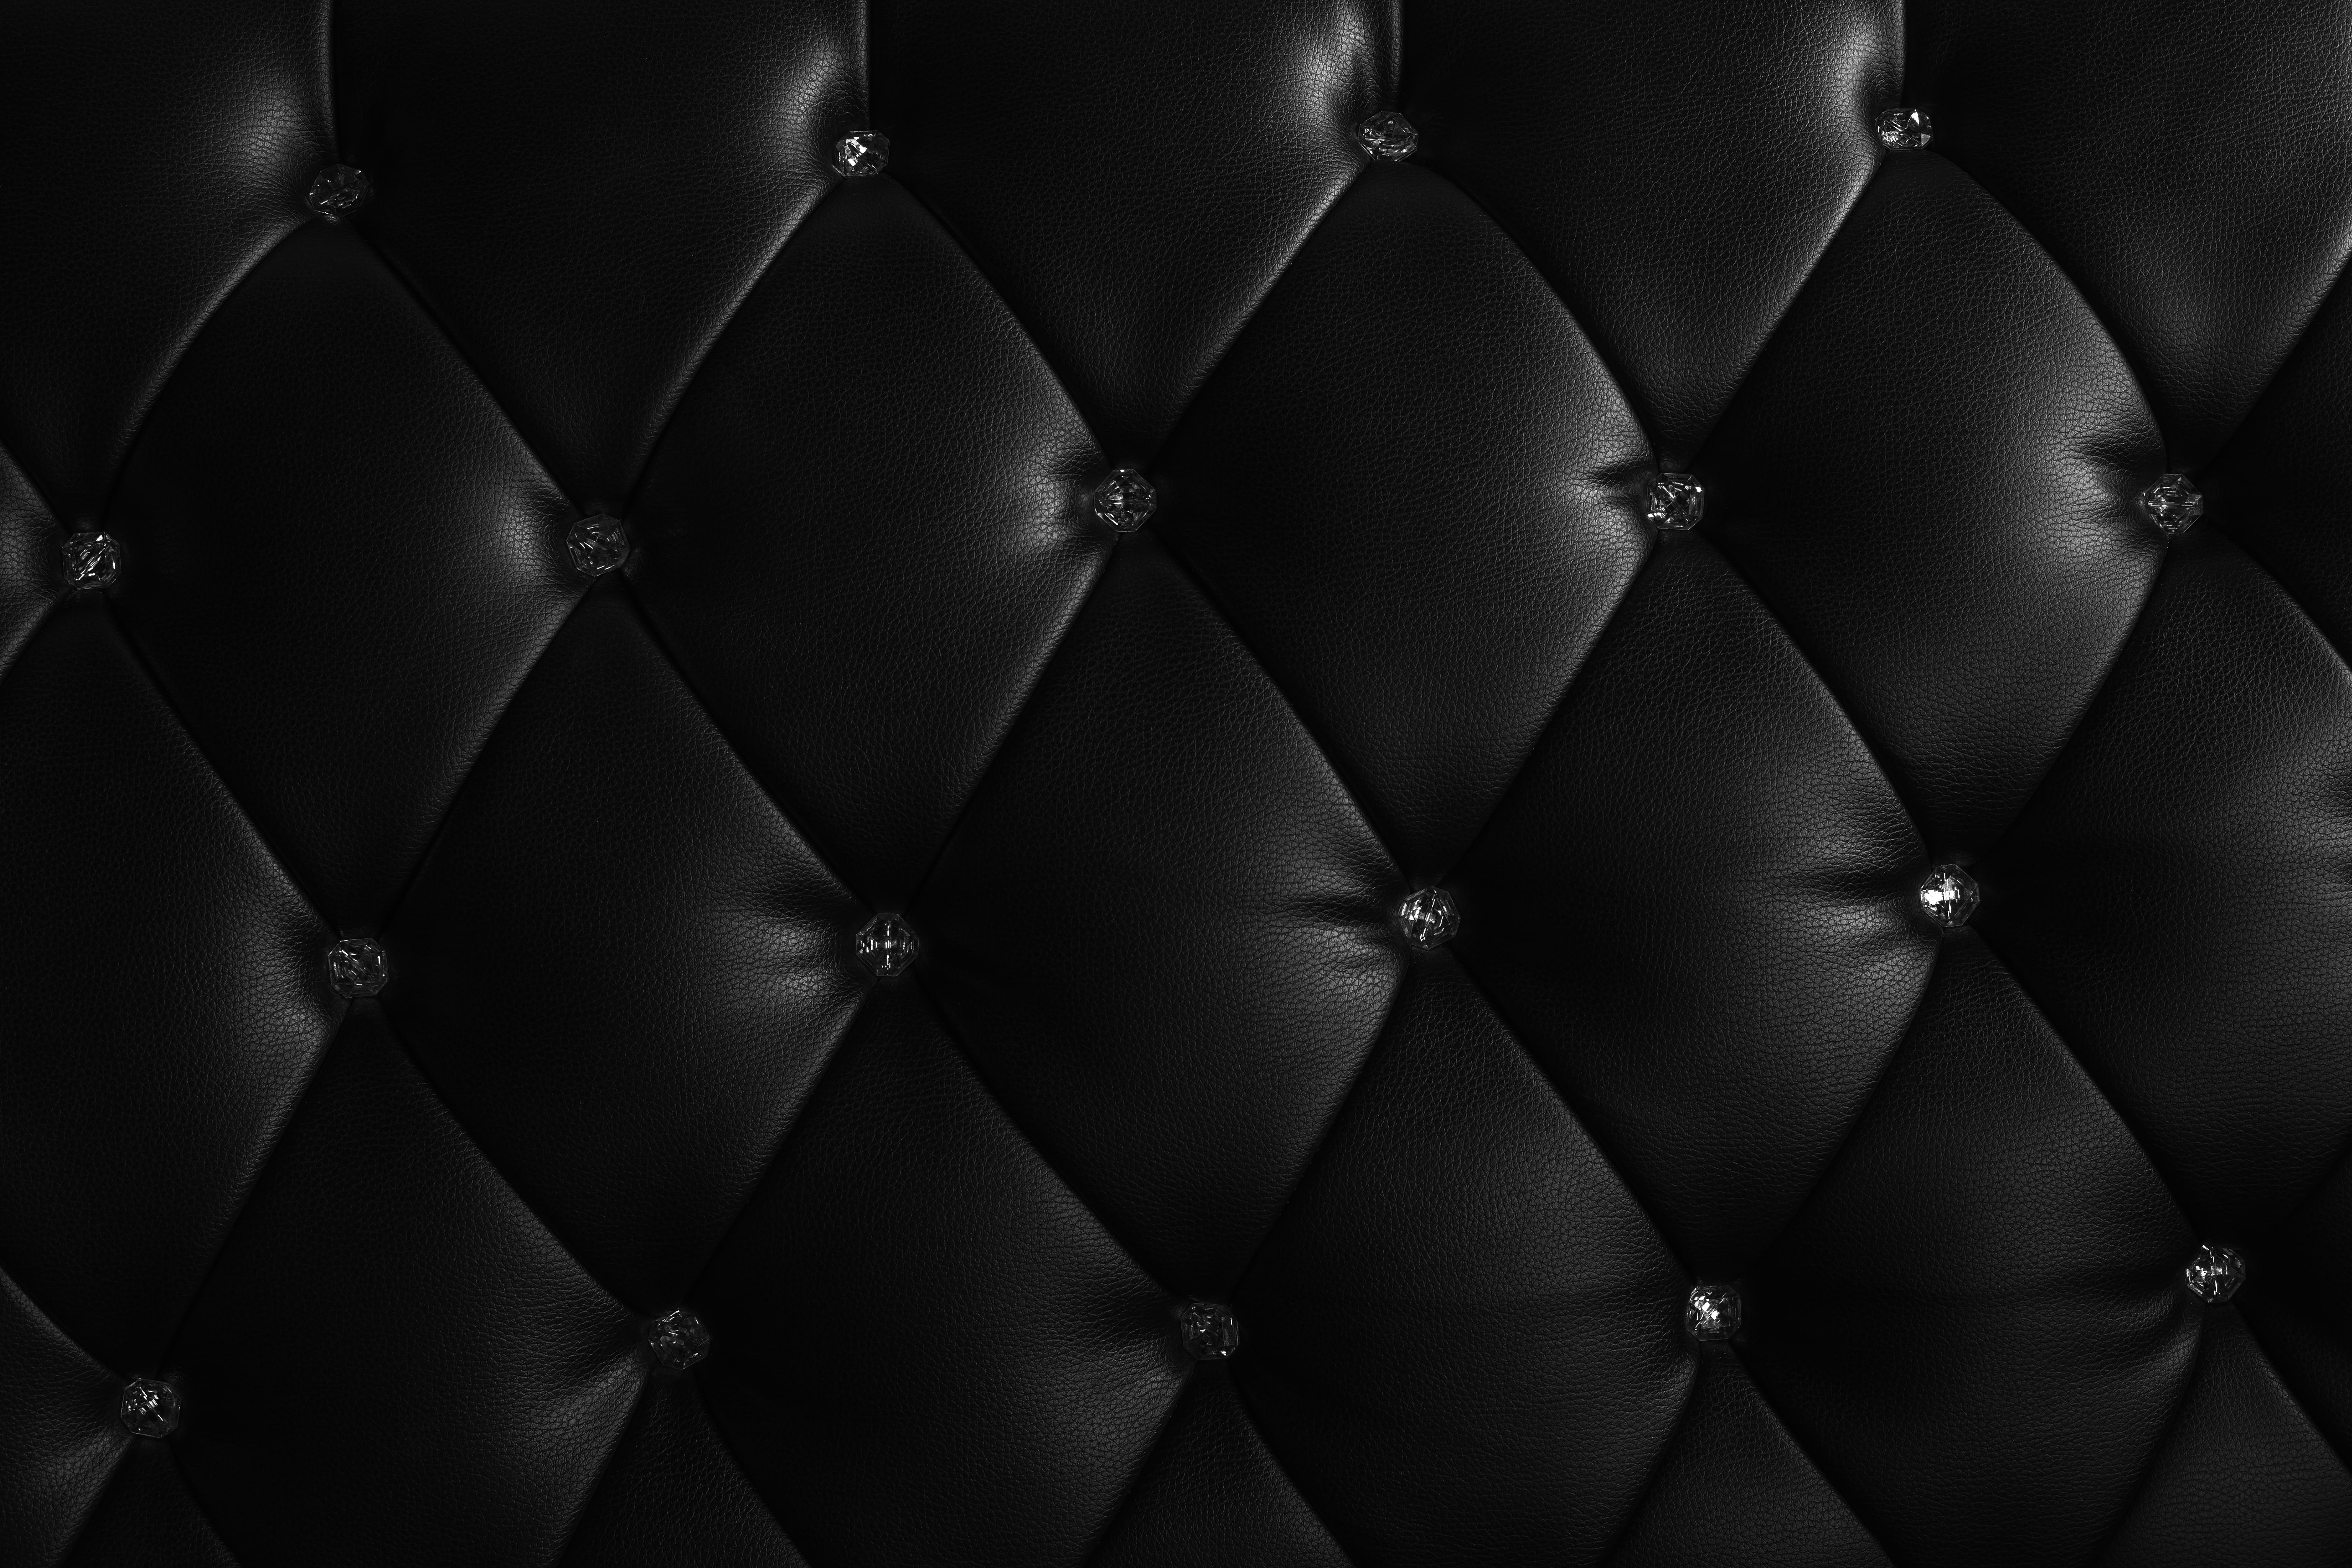 tufted black leather cover, texture, upholstery, skin, furniture